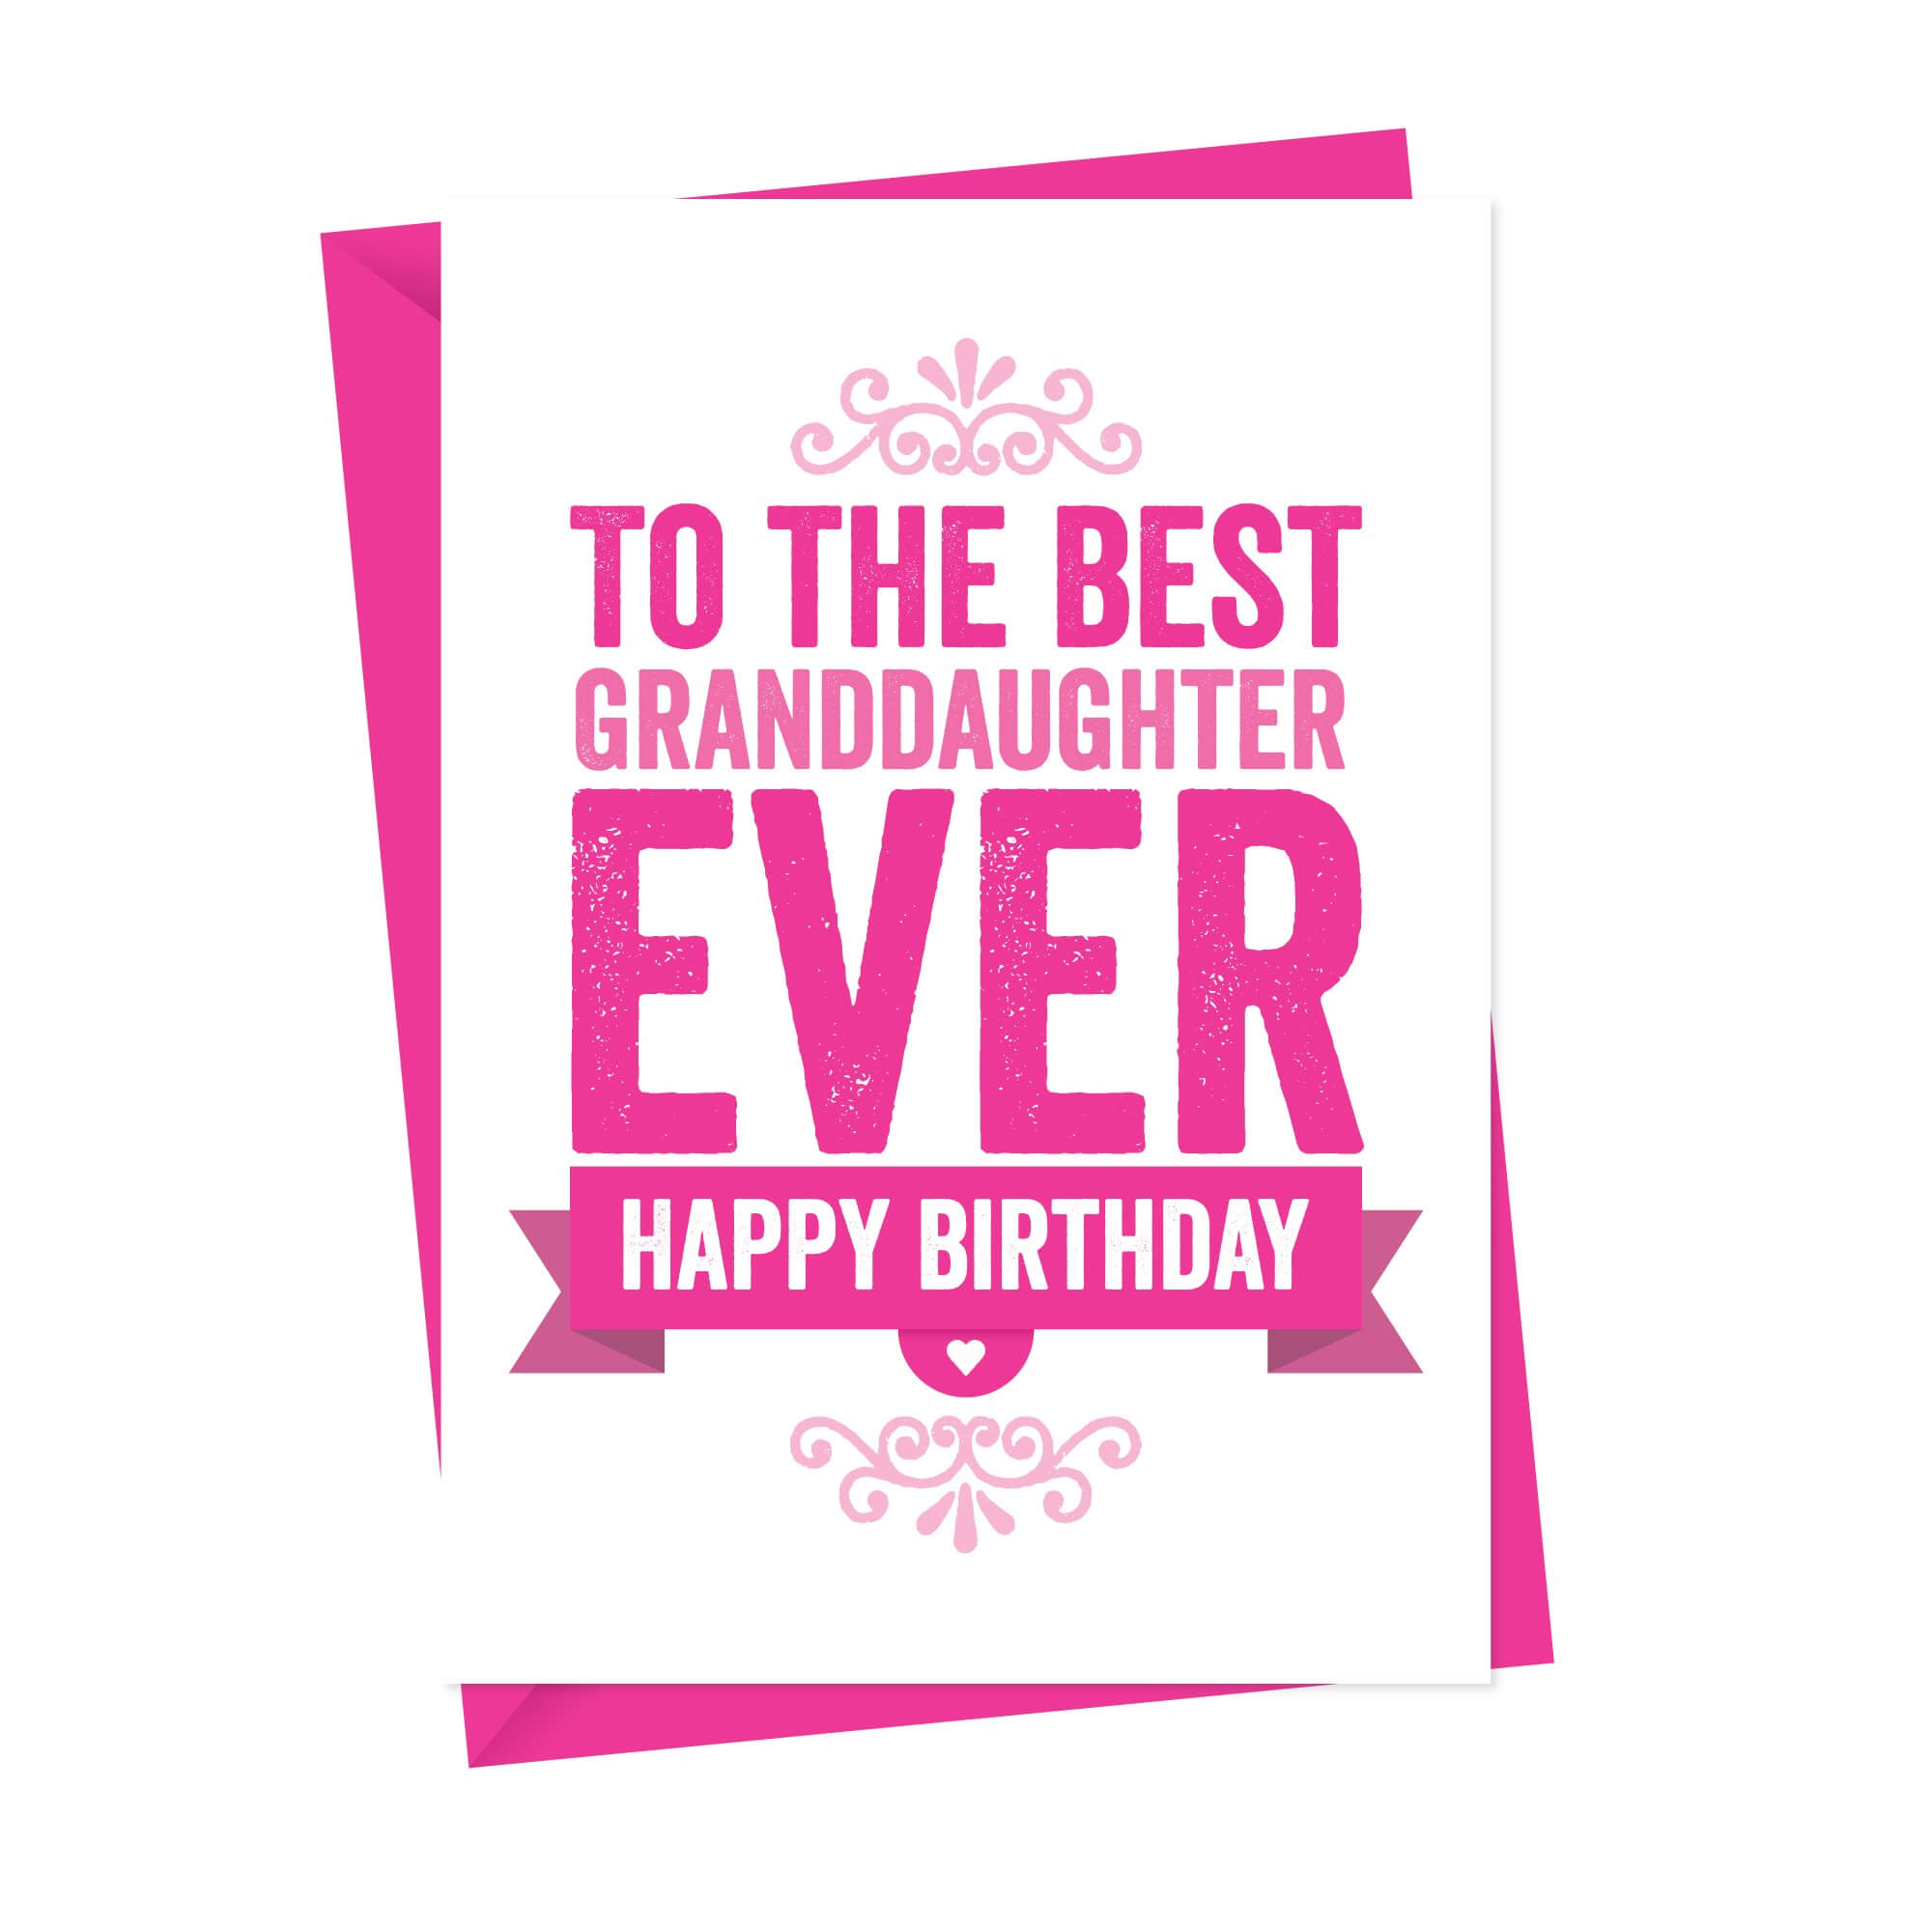 90+ Happy Birthday Wishes for Granddaughter – Greeting Cards, Messages, Quotes, Cake Images.